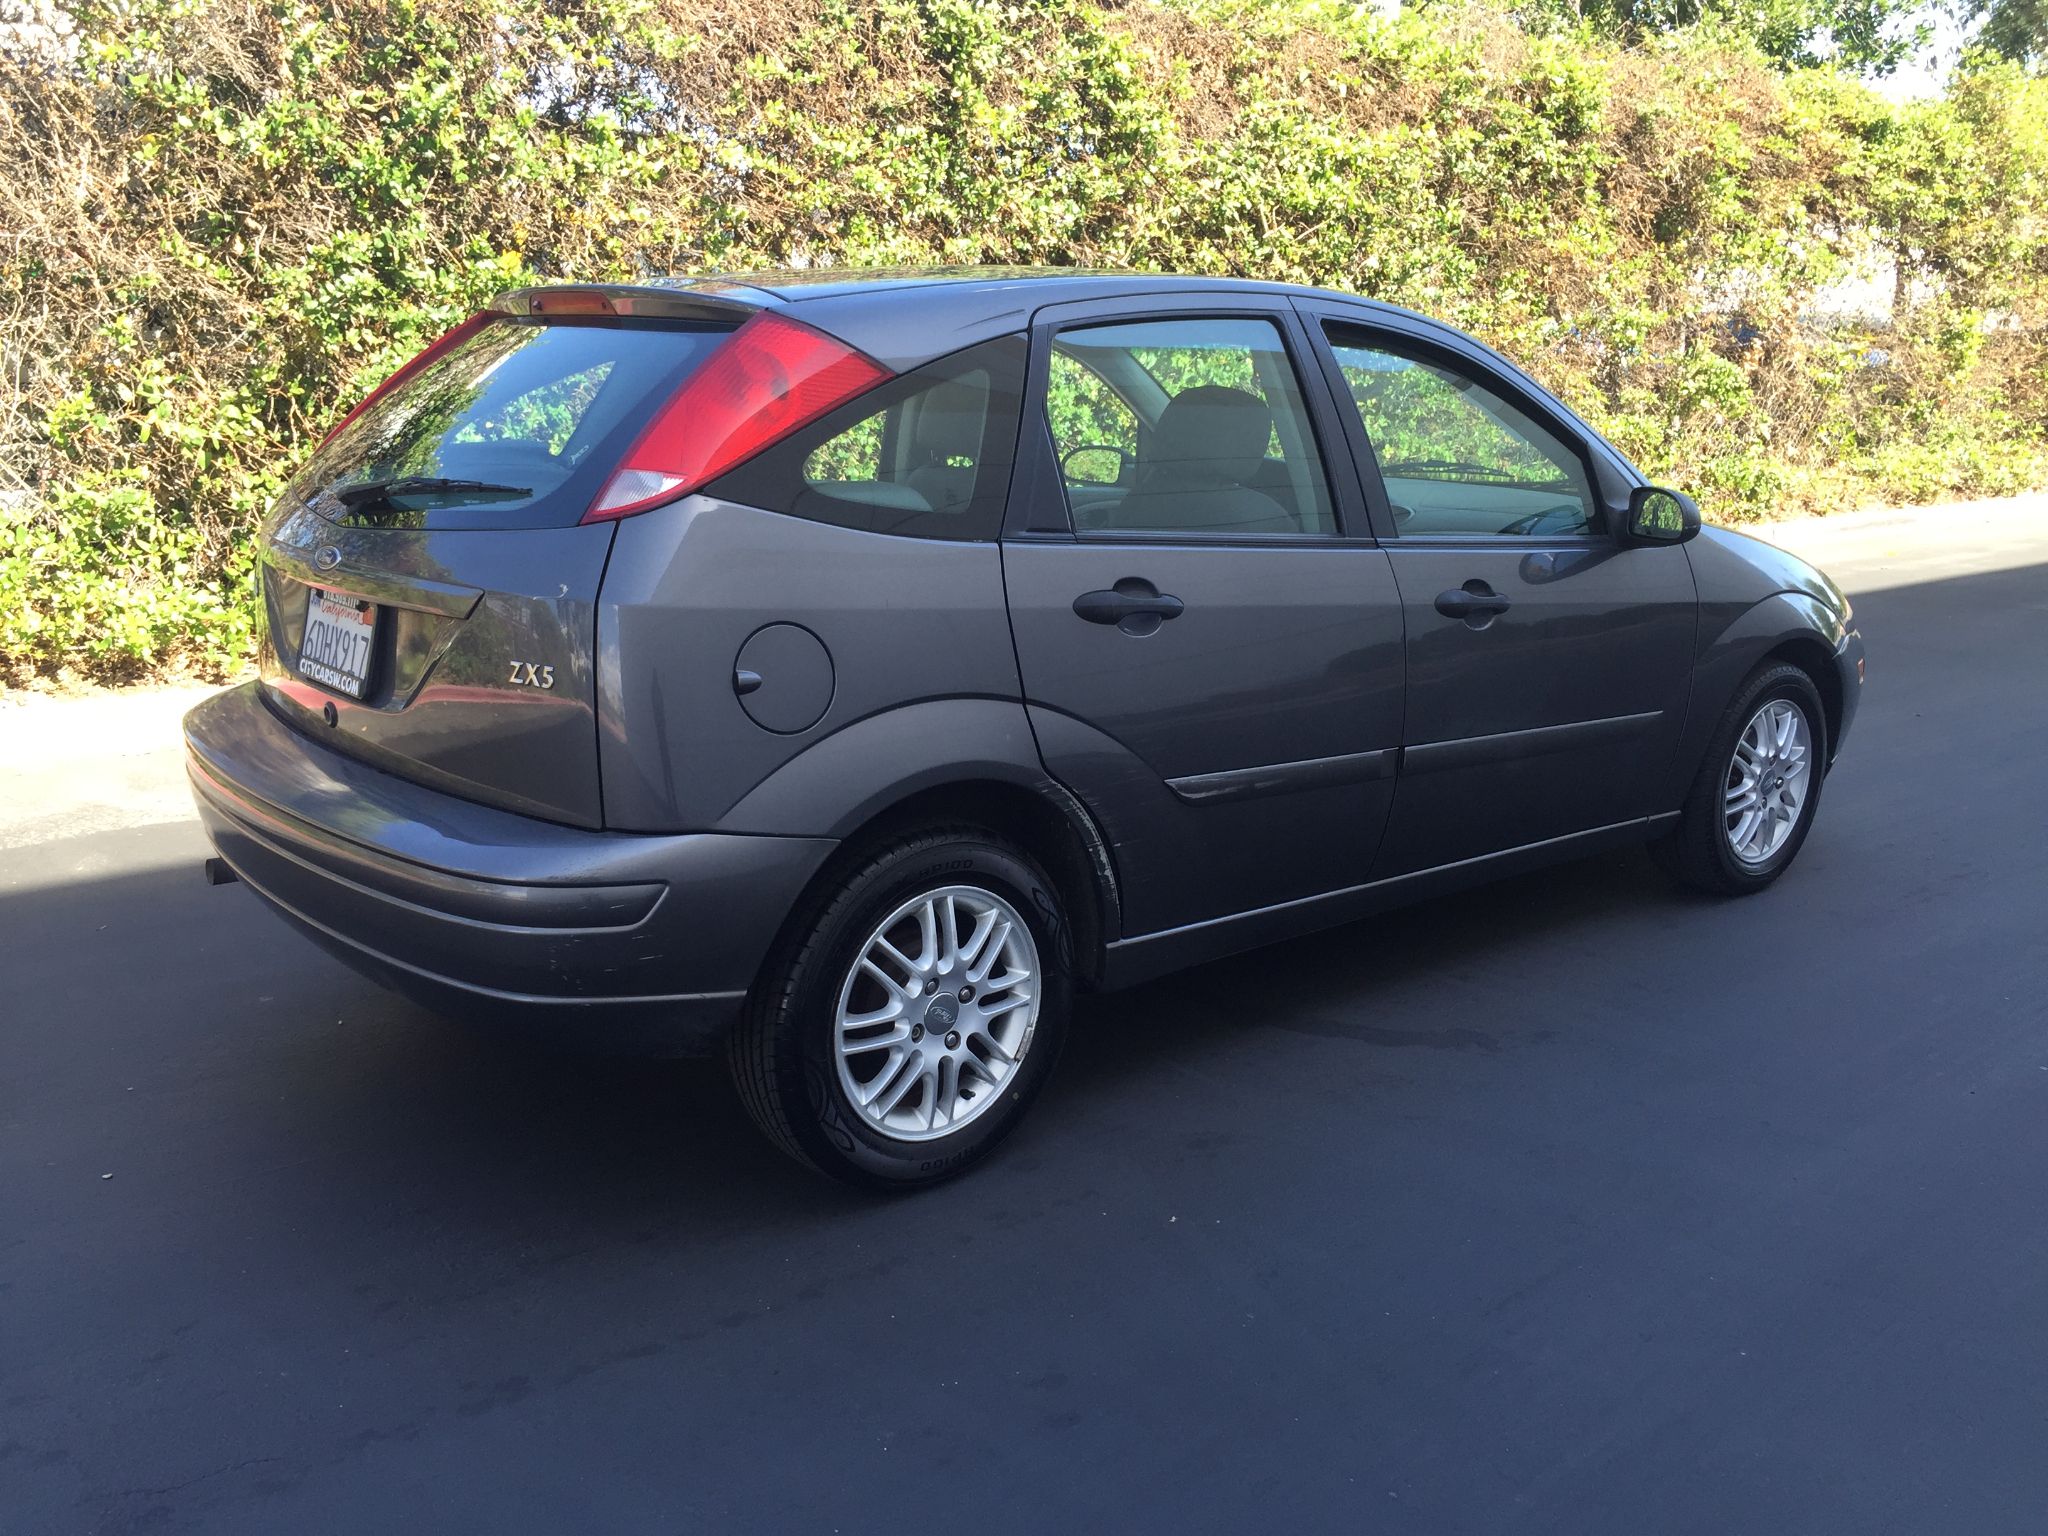 Used 2004 Ford Focus ZX5 Base at City Cars Warehouse INC